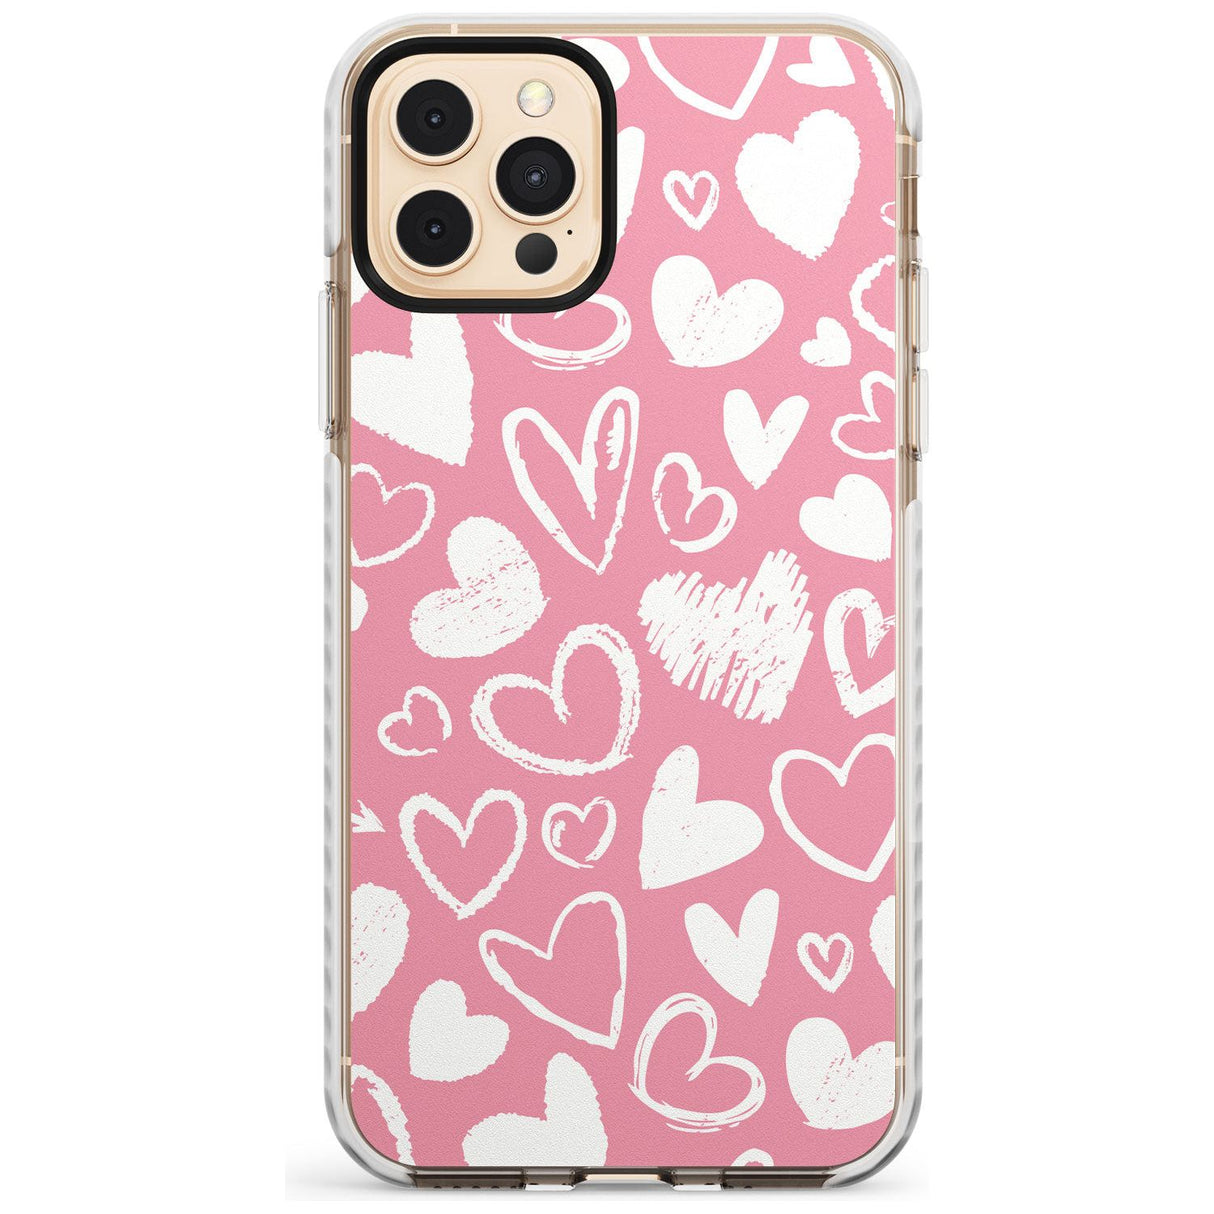 Chalk Hearts Impact Phone Case for iPhone 11 Pro Max